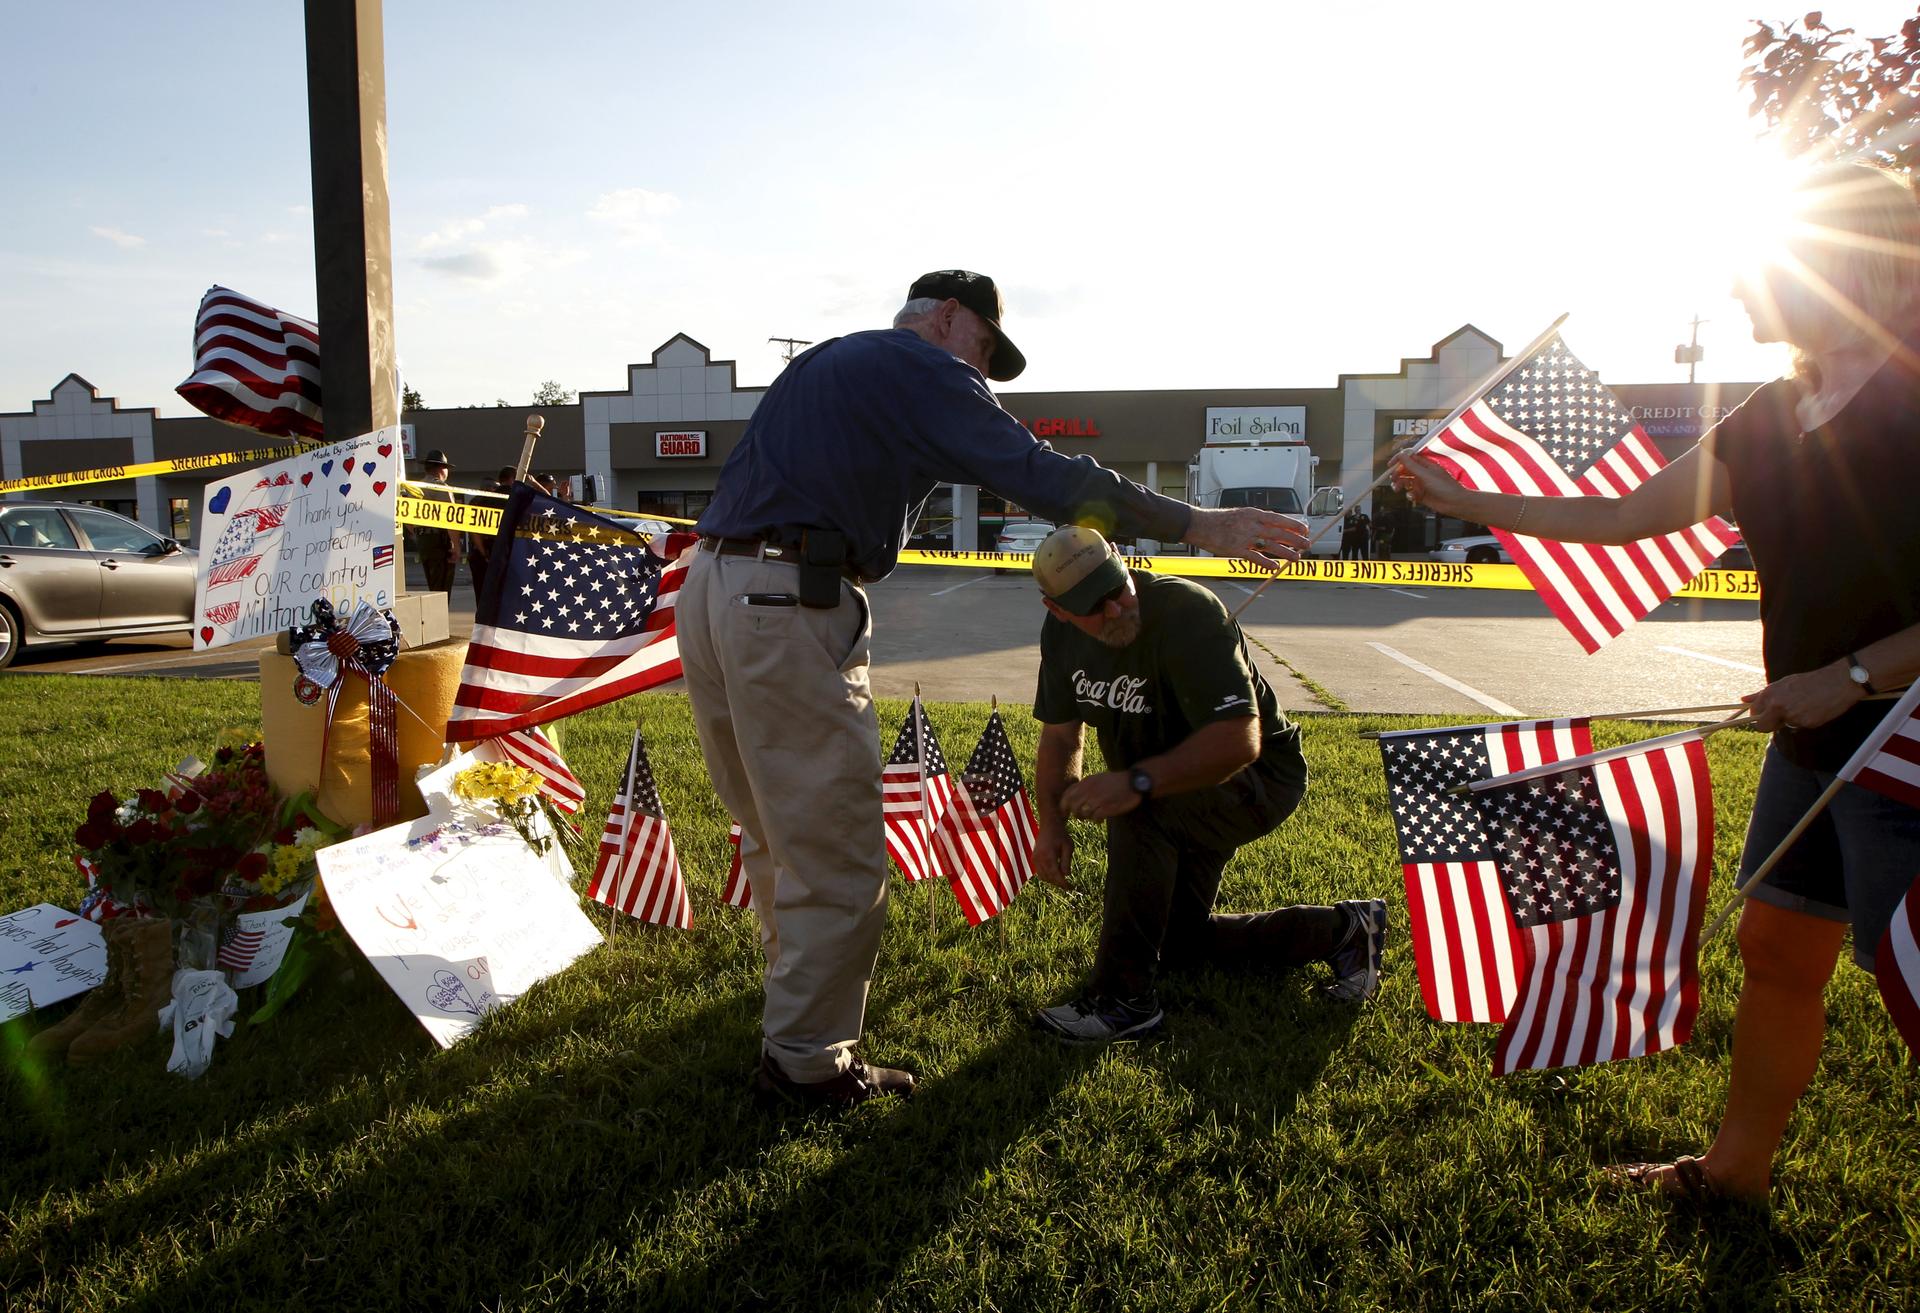 Mourners places flags at a growing memorial in front of the Armed Forces Career Center in Chattanooga, Tennessee on July 16, 2015. Four Marines were killed on Thursday by a gunman who opened fire at two military offices in Chattanooga, Tennessee, before b